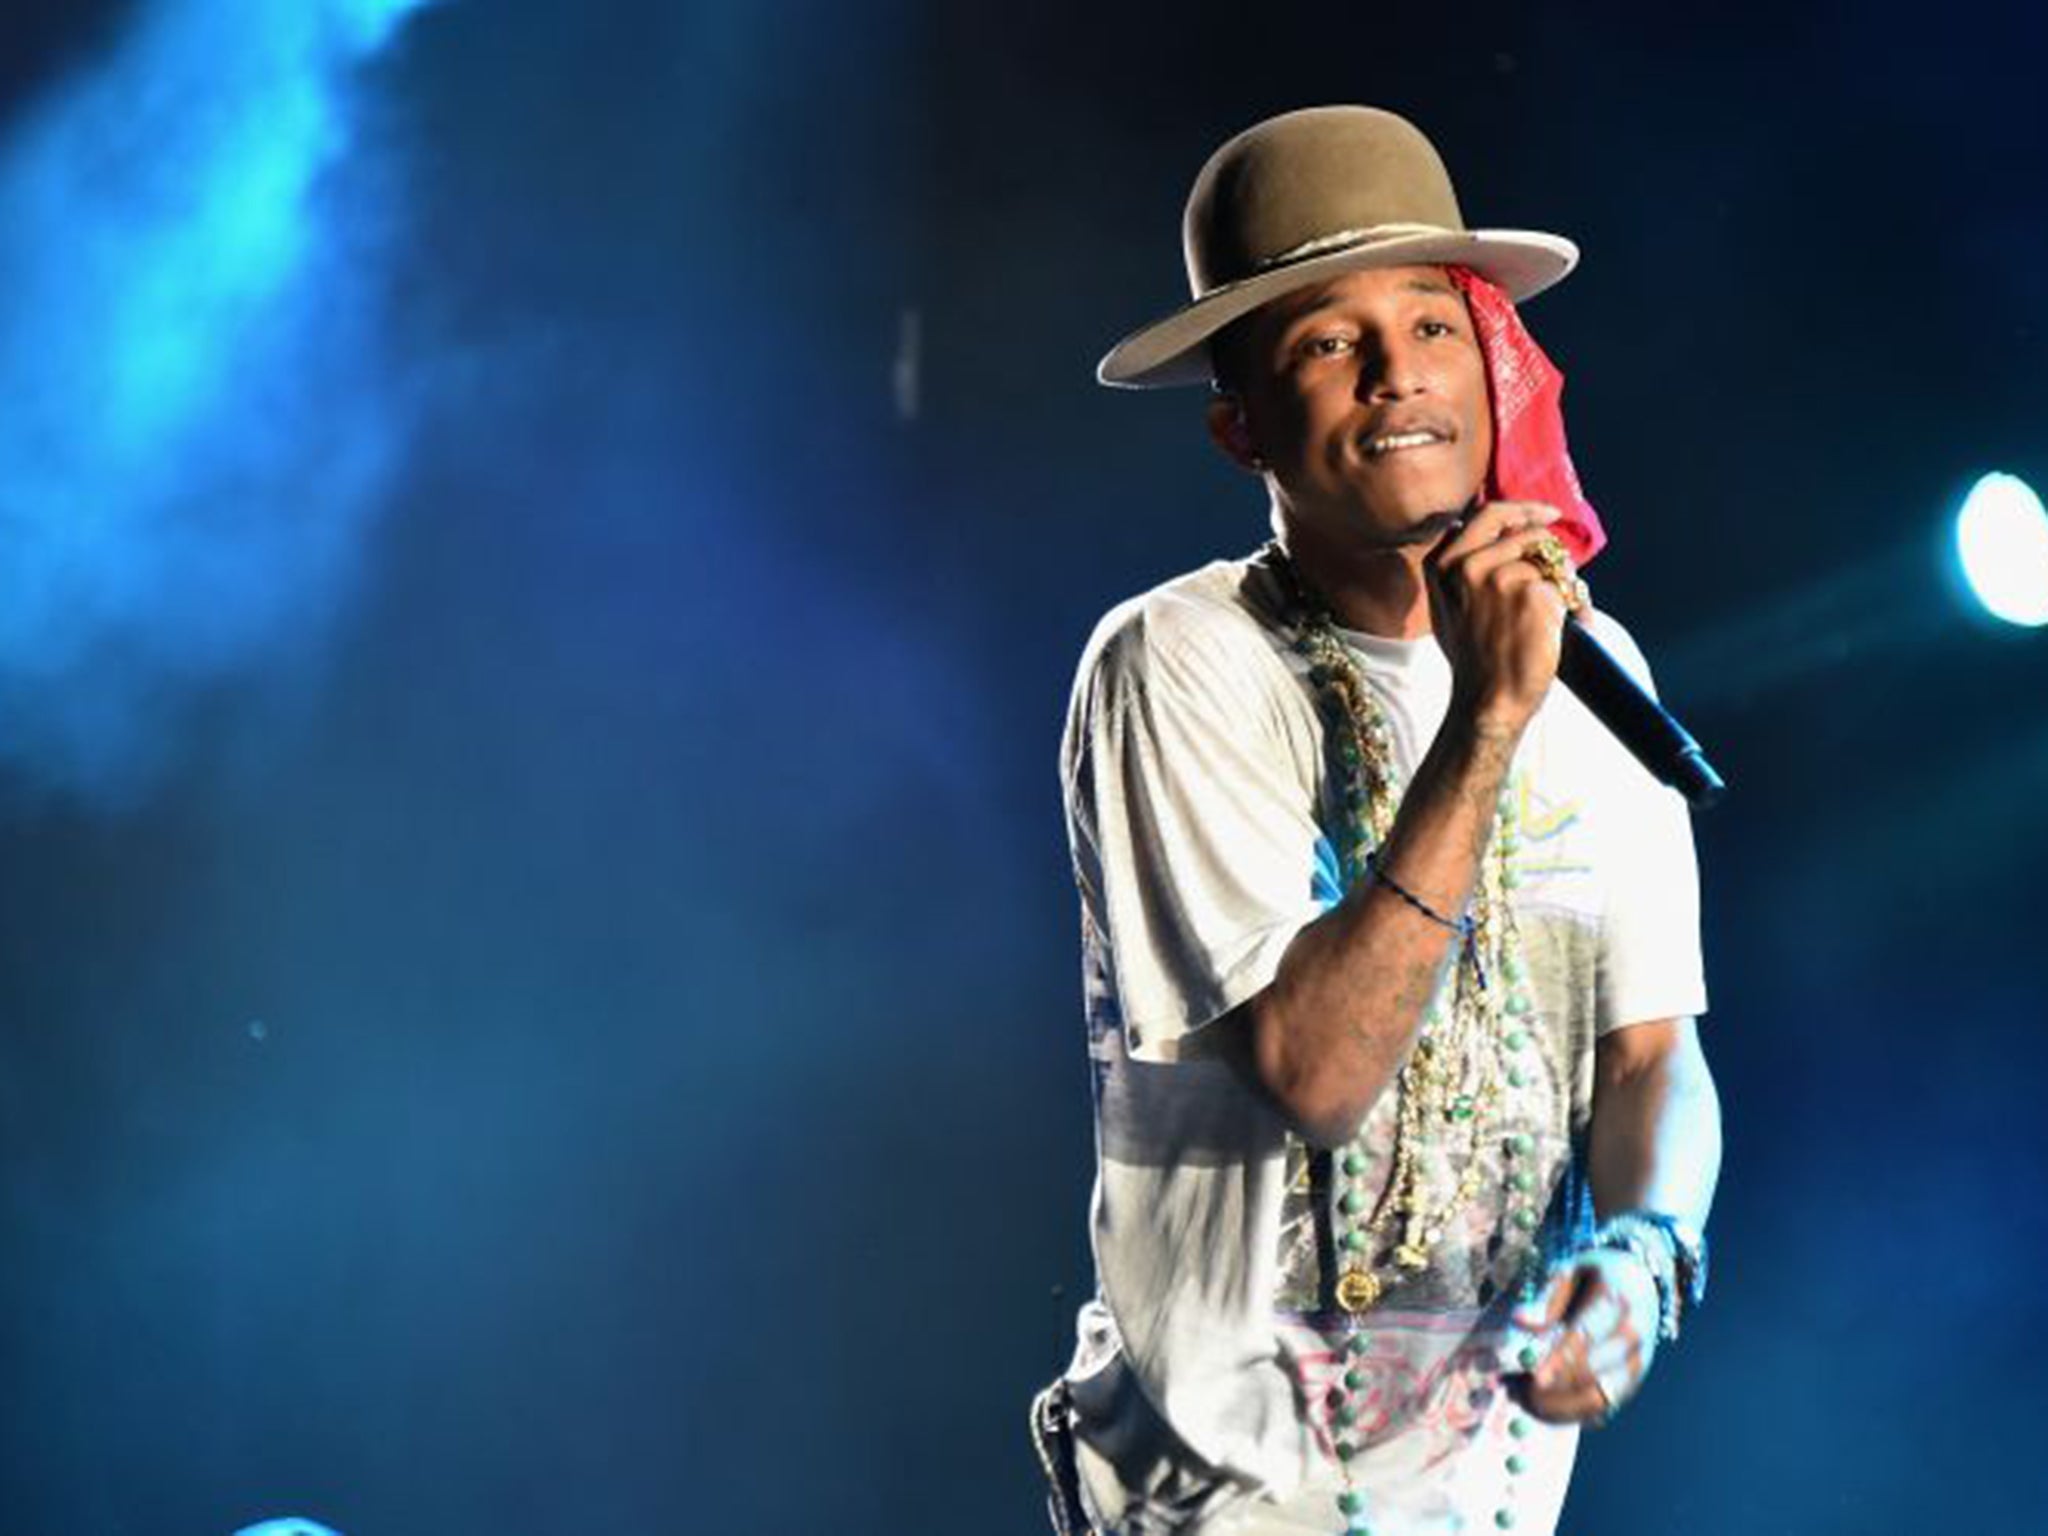 Pharrell Williams' “Happy” was the most searched-for song lyric of 2014